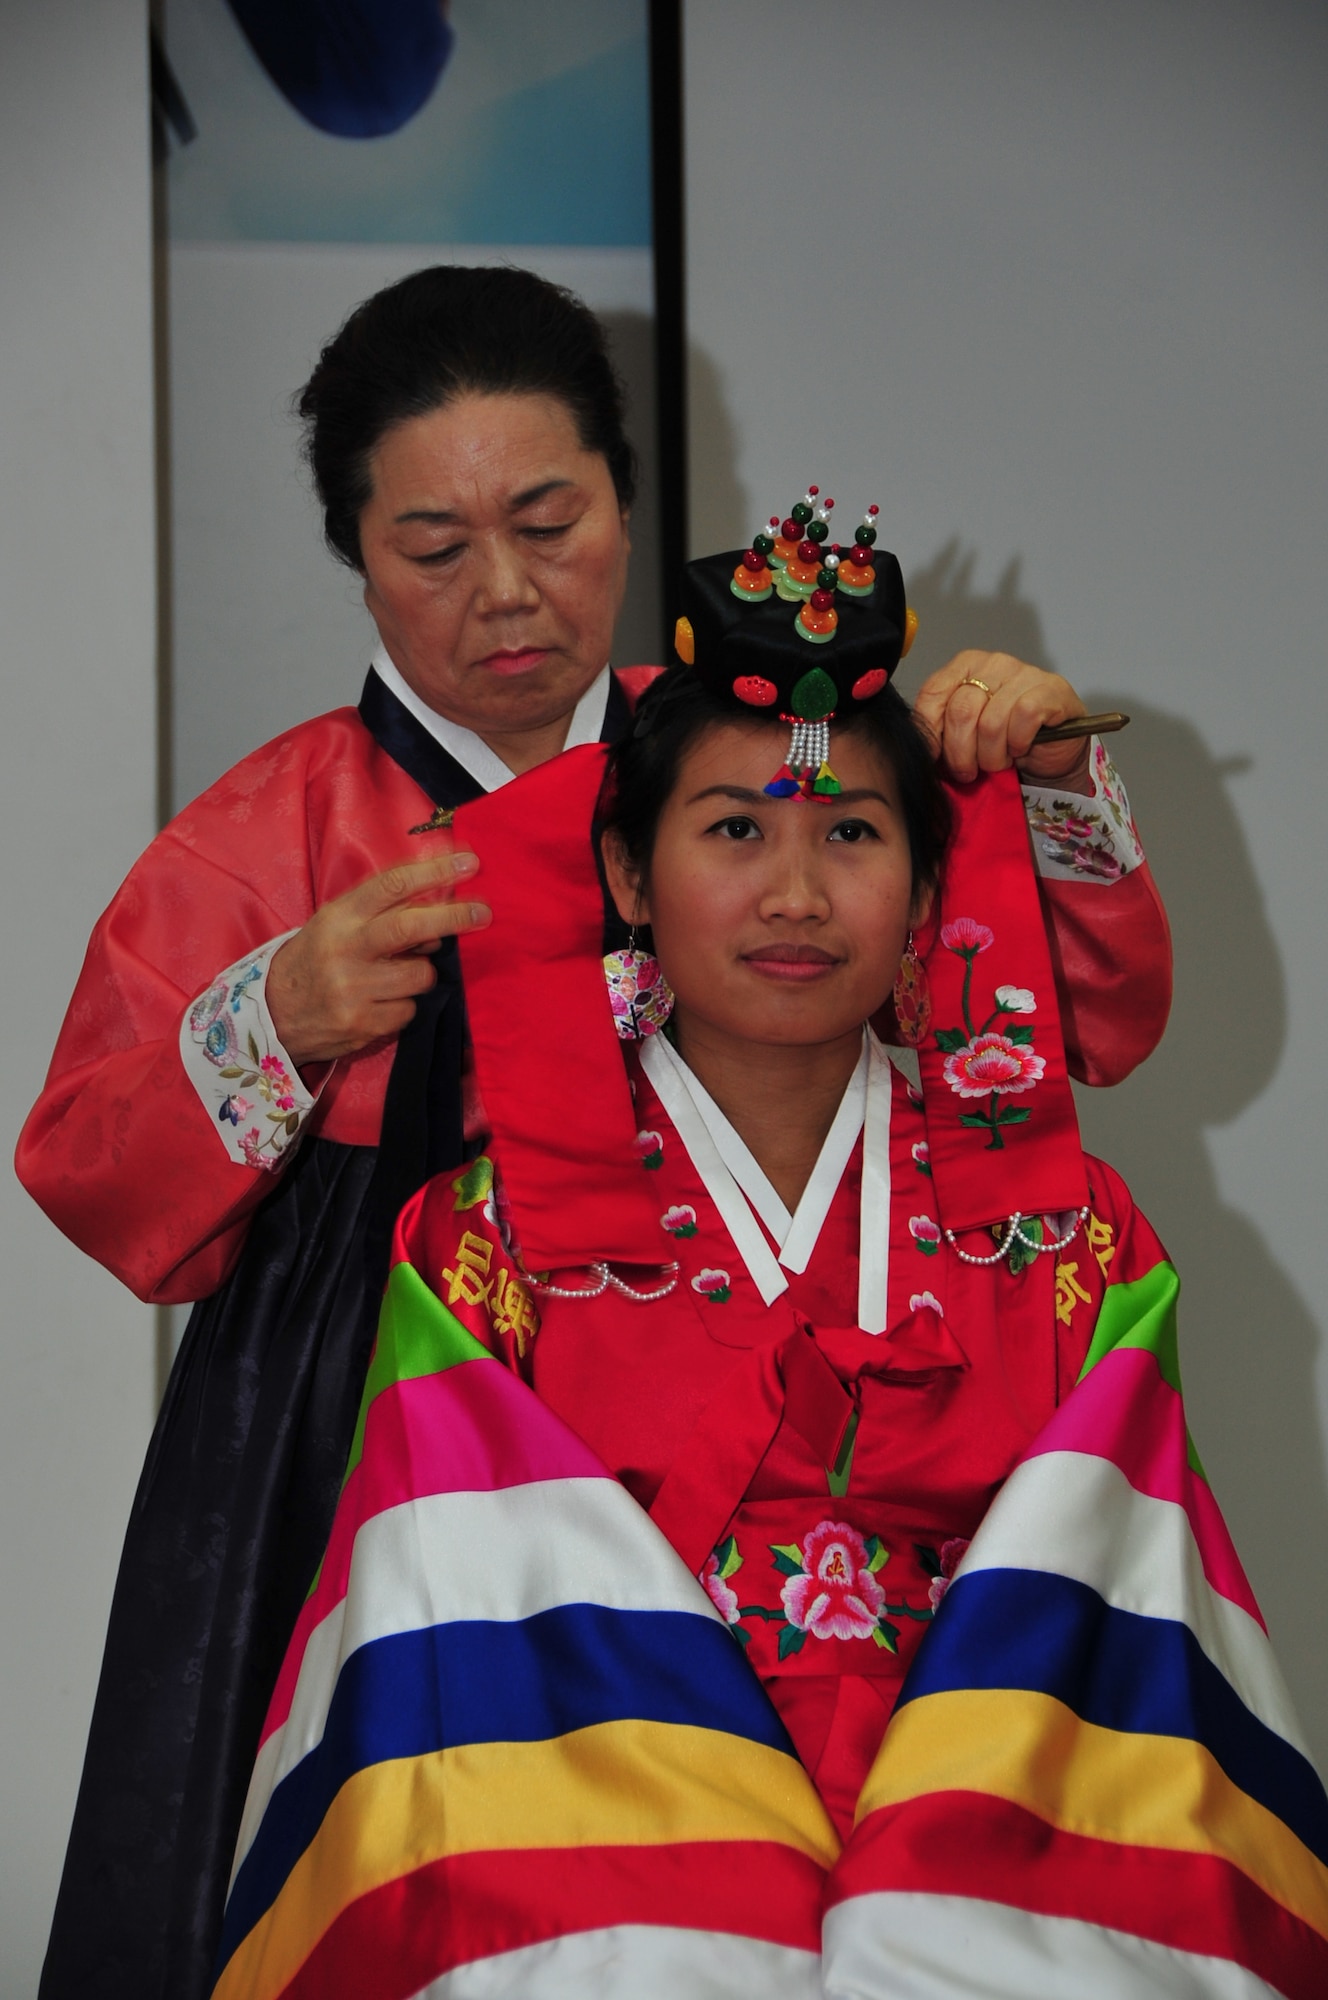 PYEONGTAEK, Republic of Korea - A Pyeongtaek University culture instructor dresses Osan Air Base spouse Suchada Sepassi in a traditional Korean wedding dress during a culture class at Pyeongtaek University May 16, 2014. The class was part of the 7th Air Force Head Start Program designed to teach newcomers about Korean culture and language. (U.S. Air Force photo by Tech. Sgt. Thomas J. Doscher)